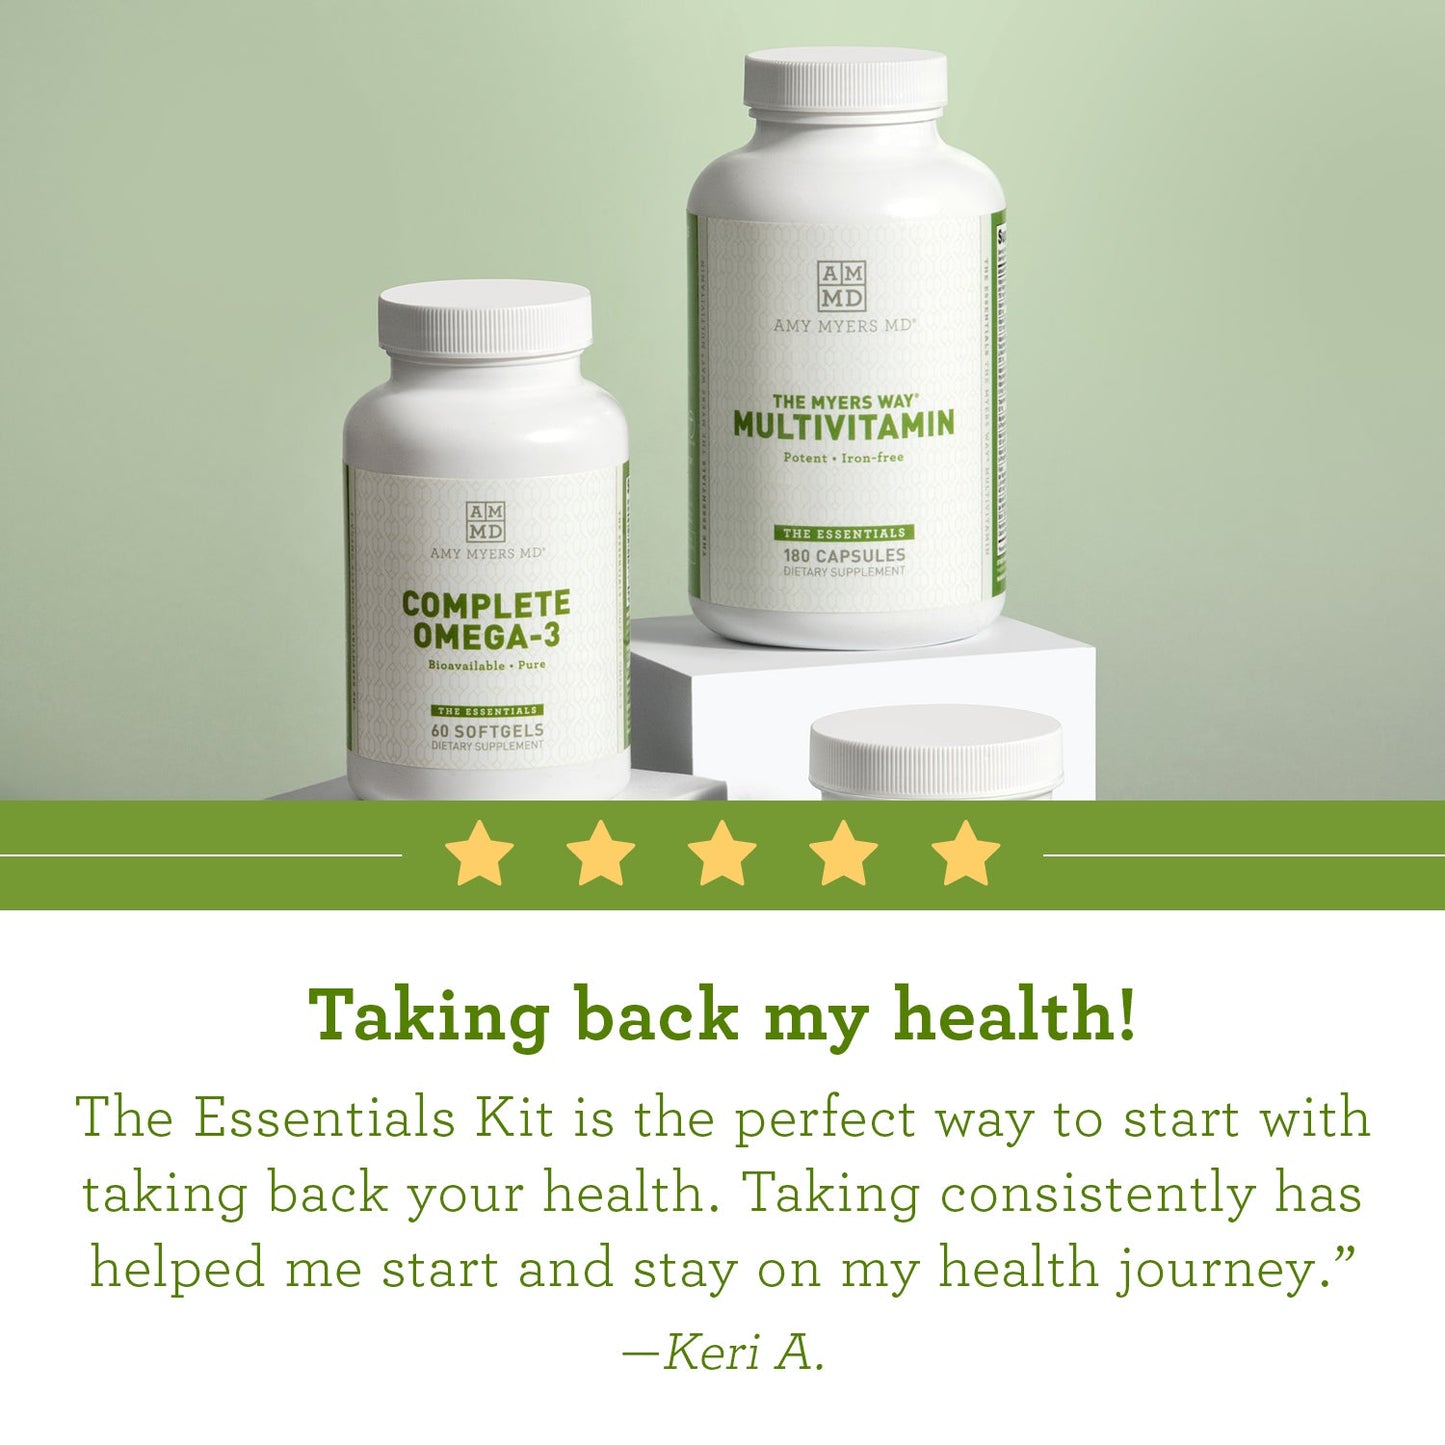 Essentials Kit by Amy Myers MD